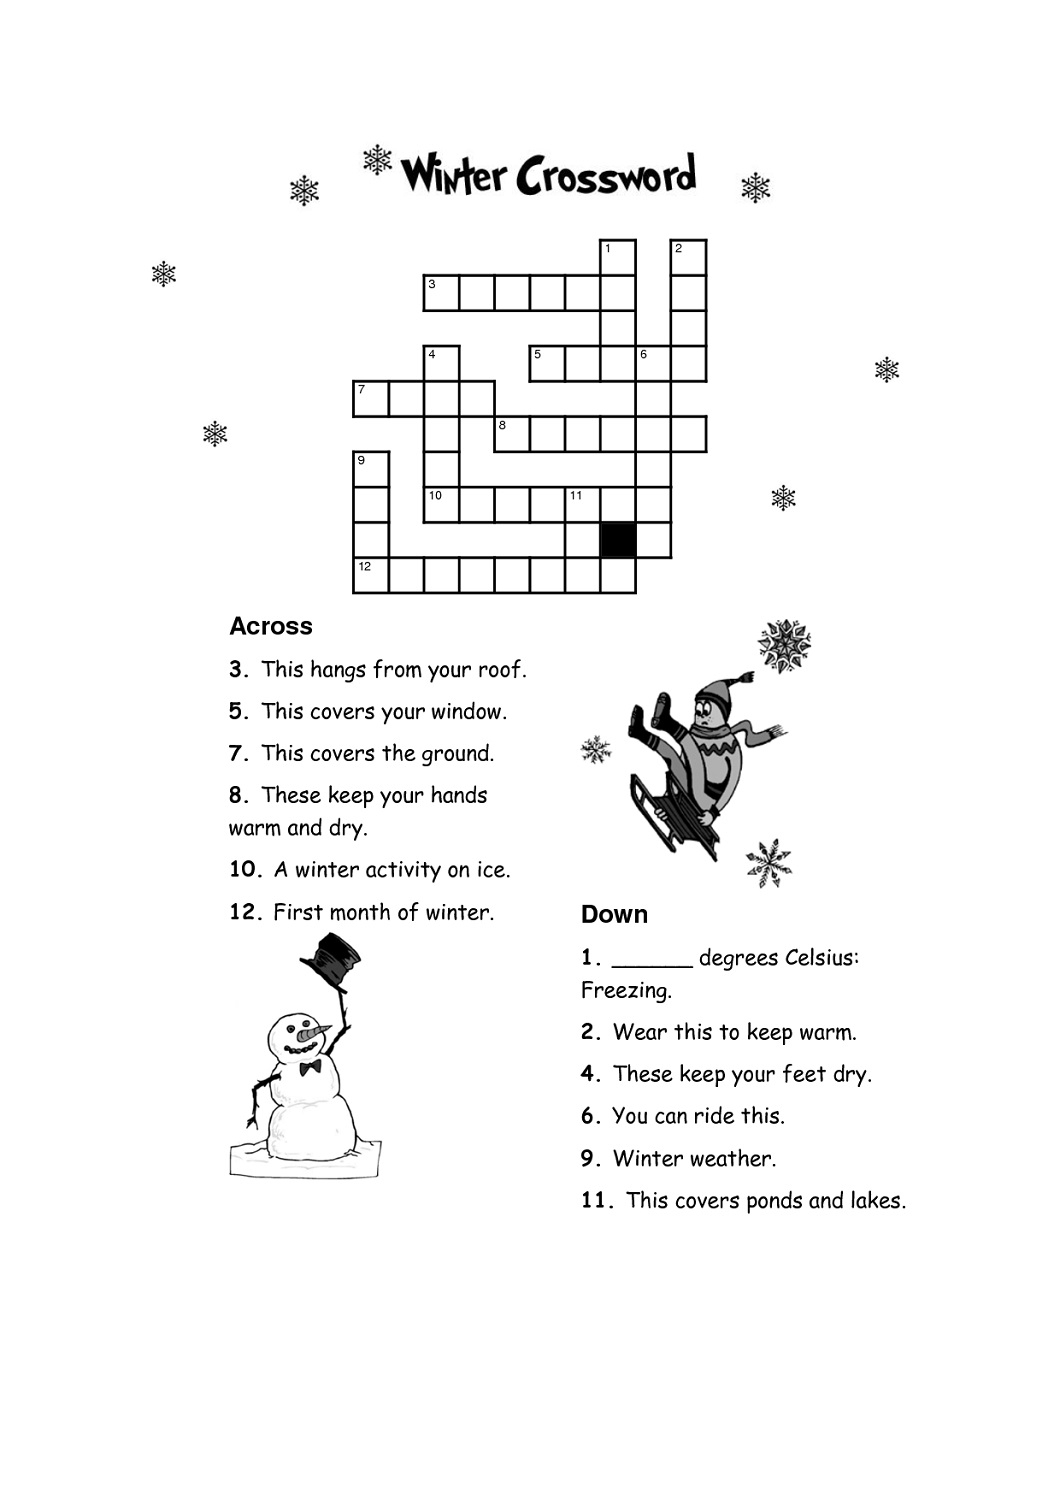 Printable Nytimes Crossword Puzzles For Teenagers